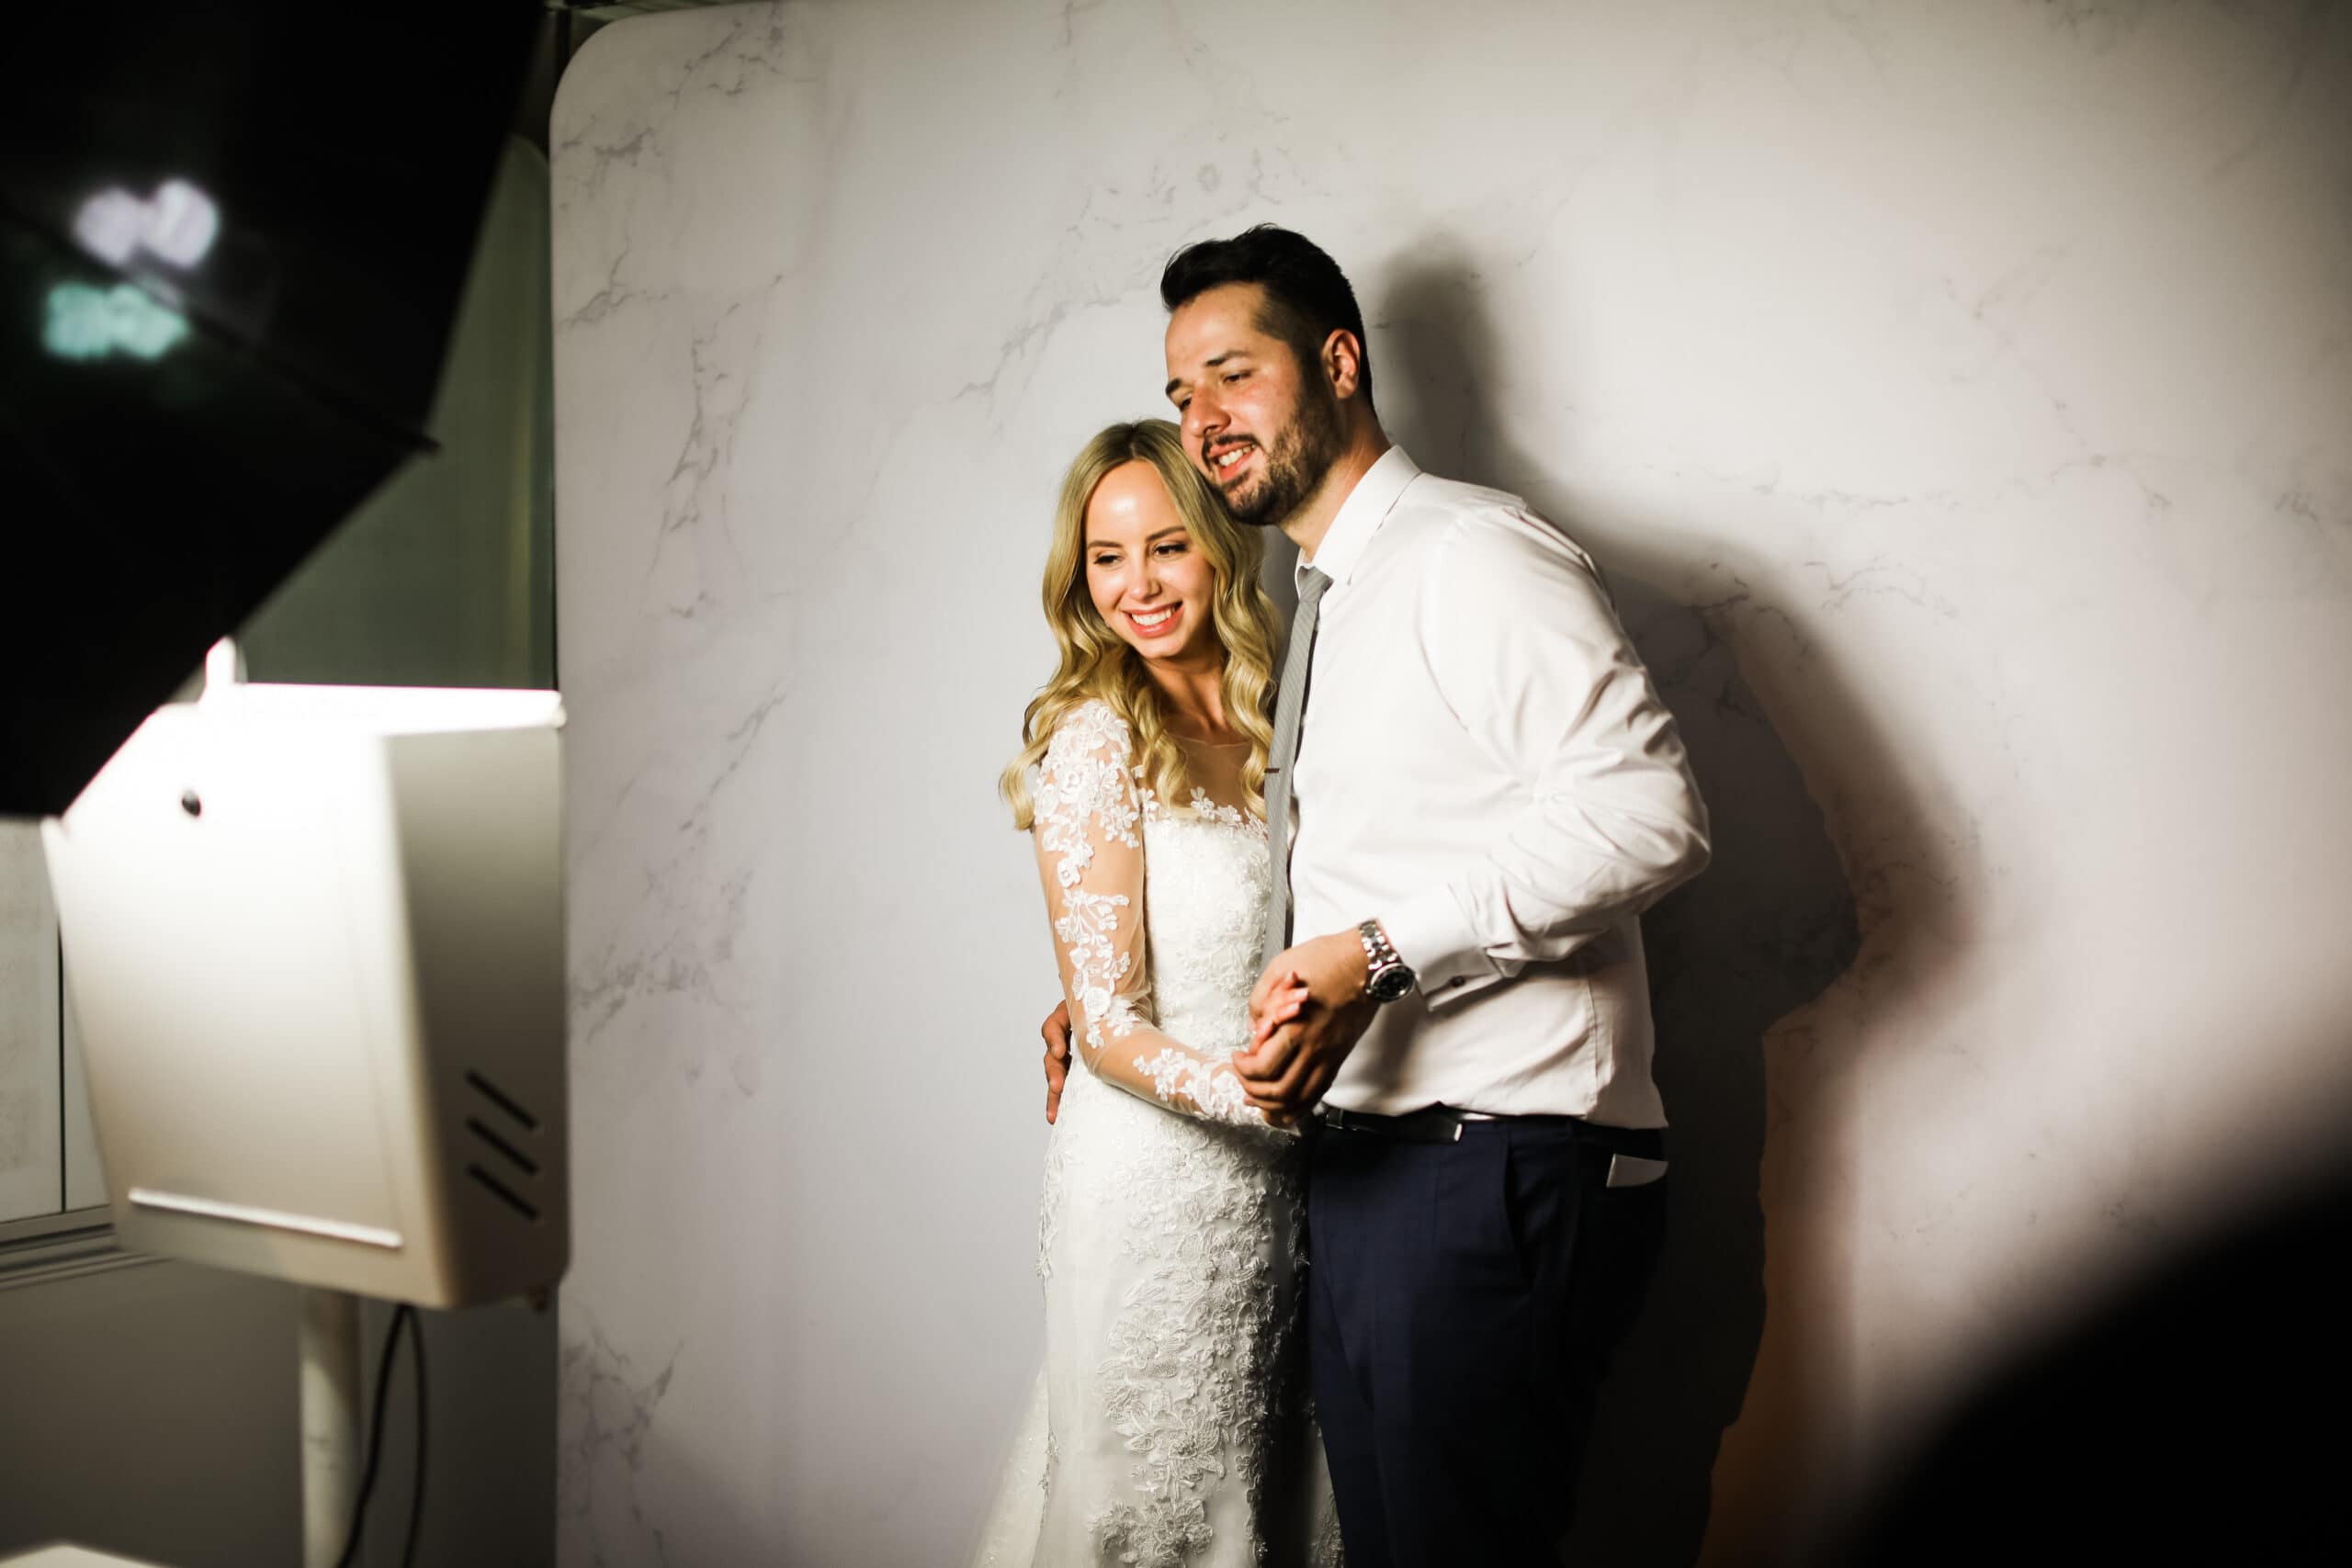 5 Reasons to Include a Photo Booth at Your Wedding